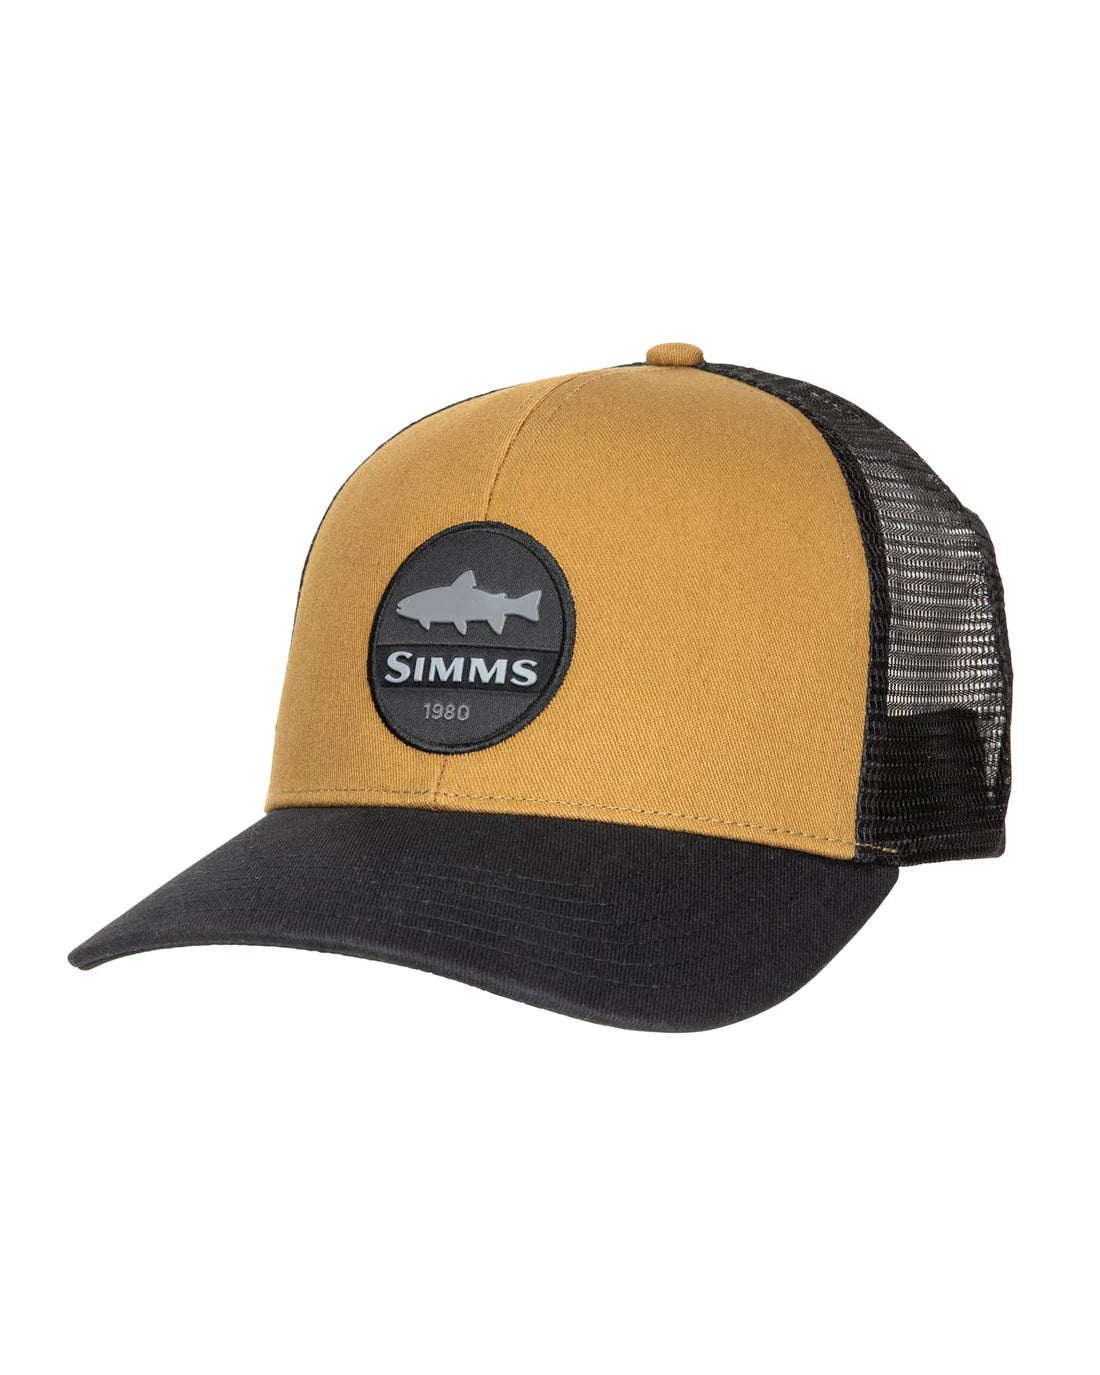 Simms Trout Patch Trucker - OSFM / DARK BRONZE - Mansfield Hunting & Fishing - Products to prepare for Corona Virus